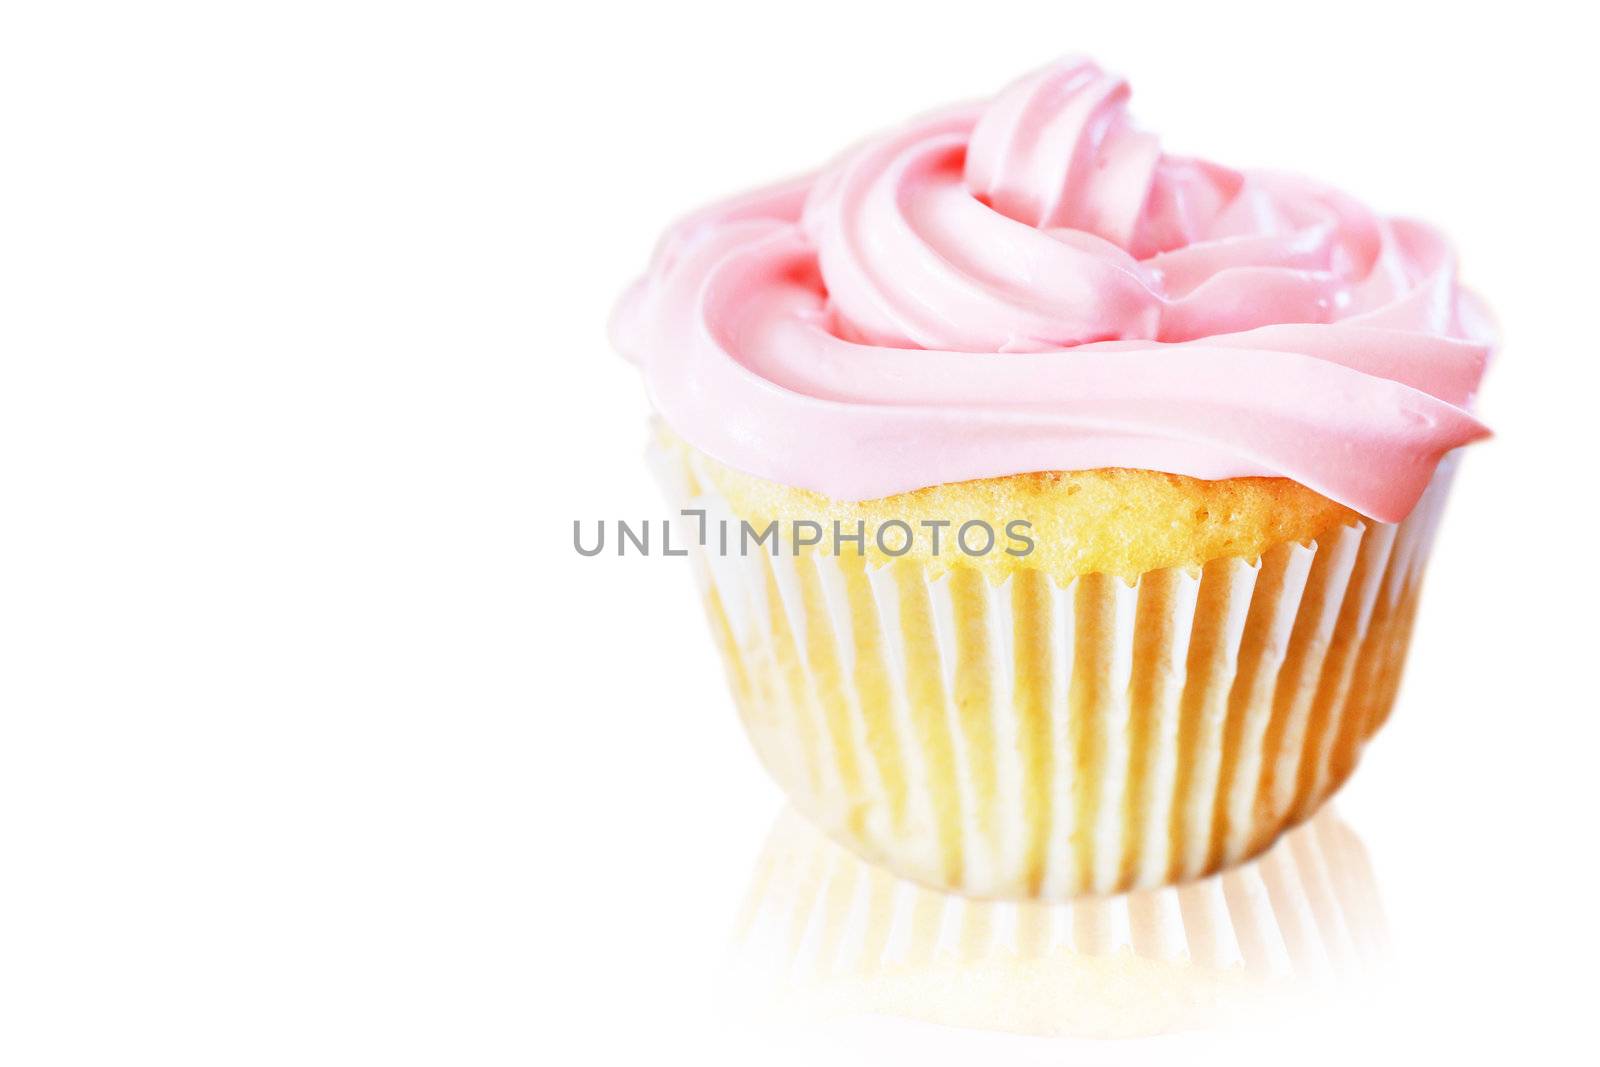 Vanilla cupcake with pink frosting